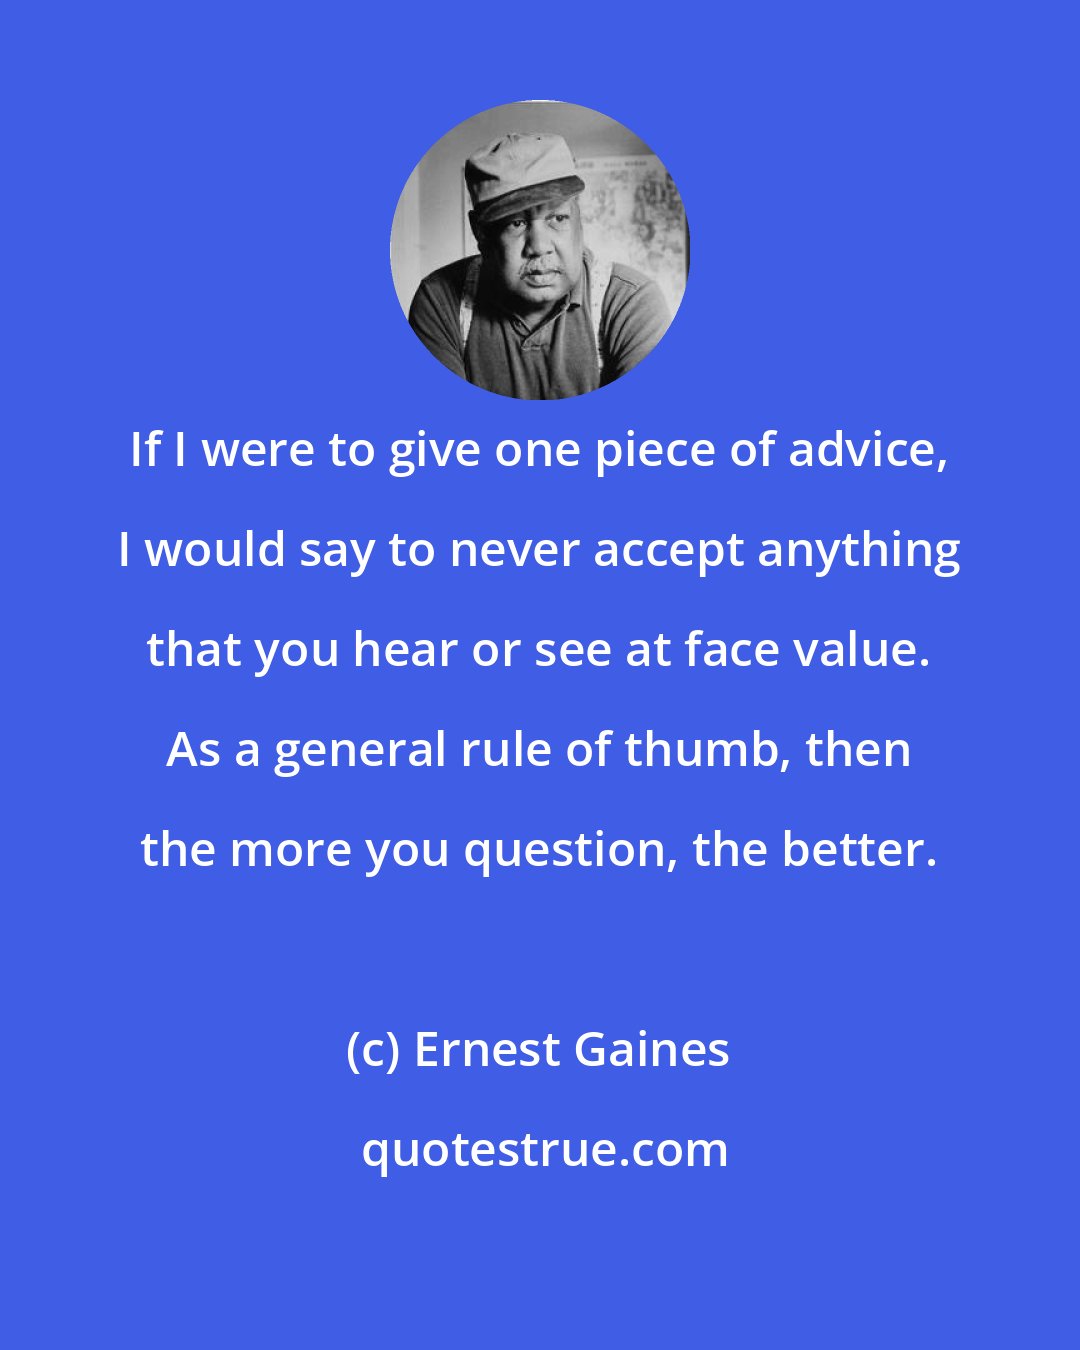 Ernest Gaines: If I were to give one piece of advice, I would say to never accept anything that you hear or see at face value. As a general rule of thumb, then the more you question, the better.